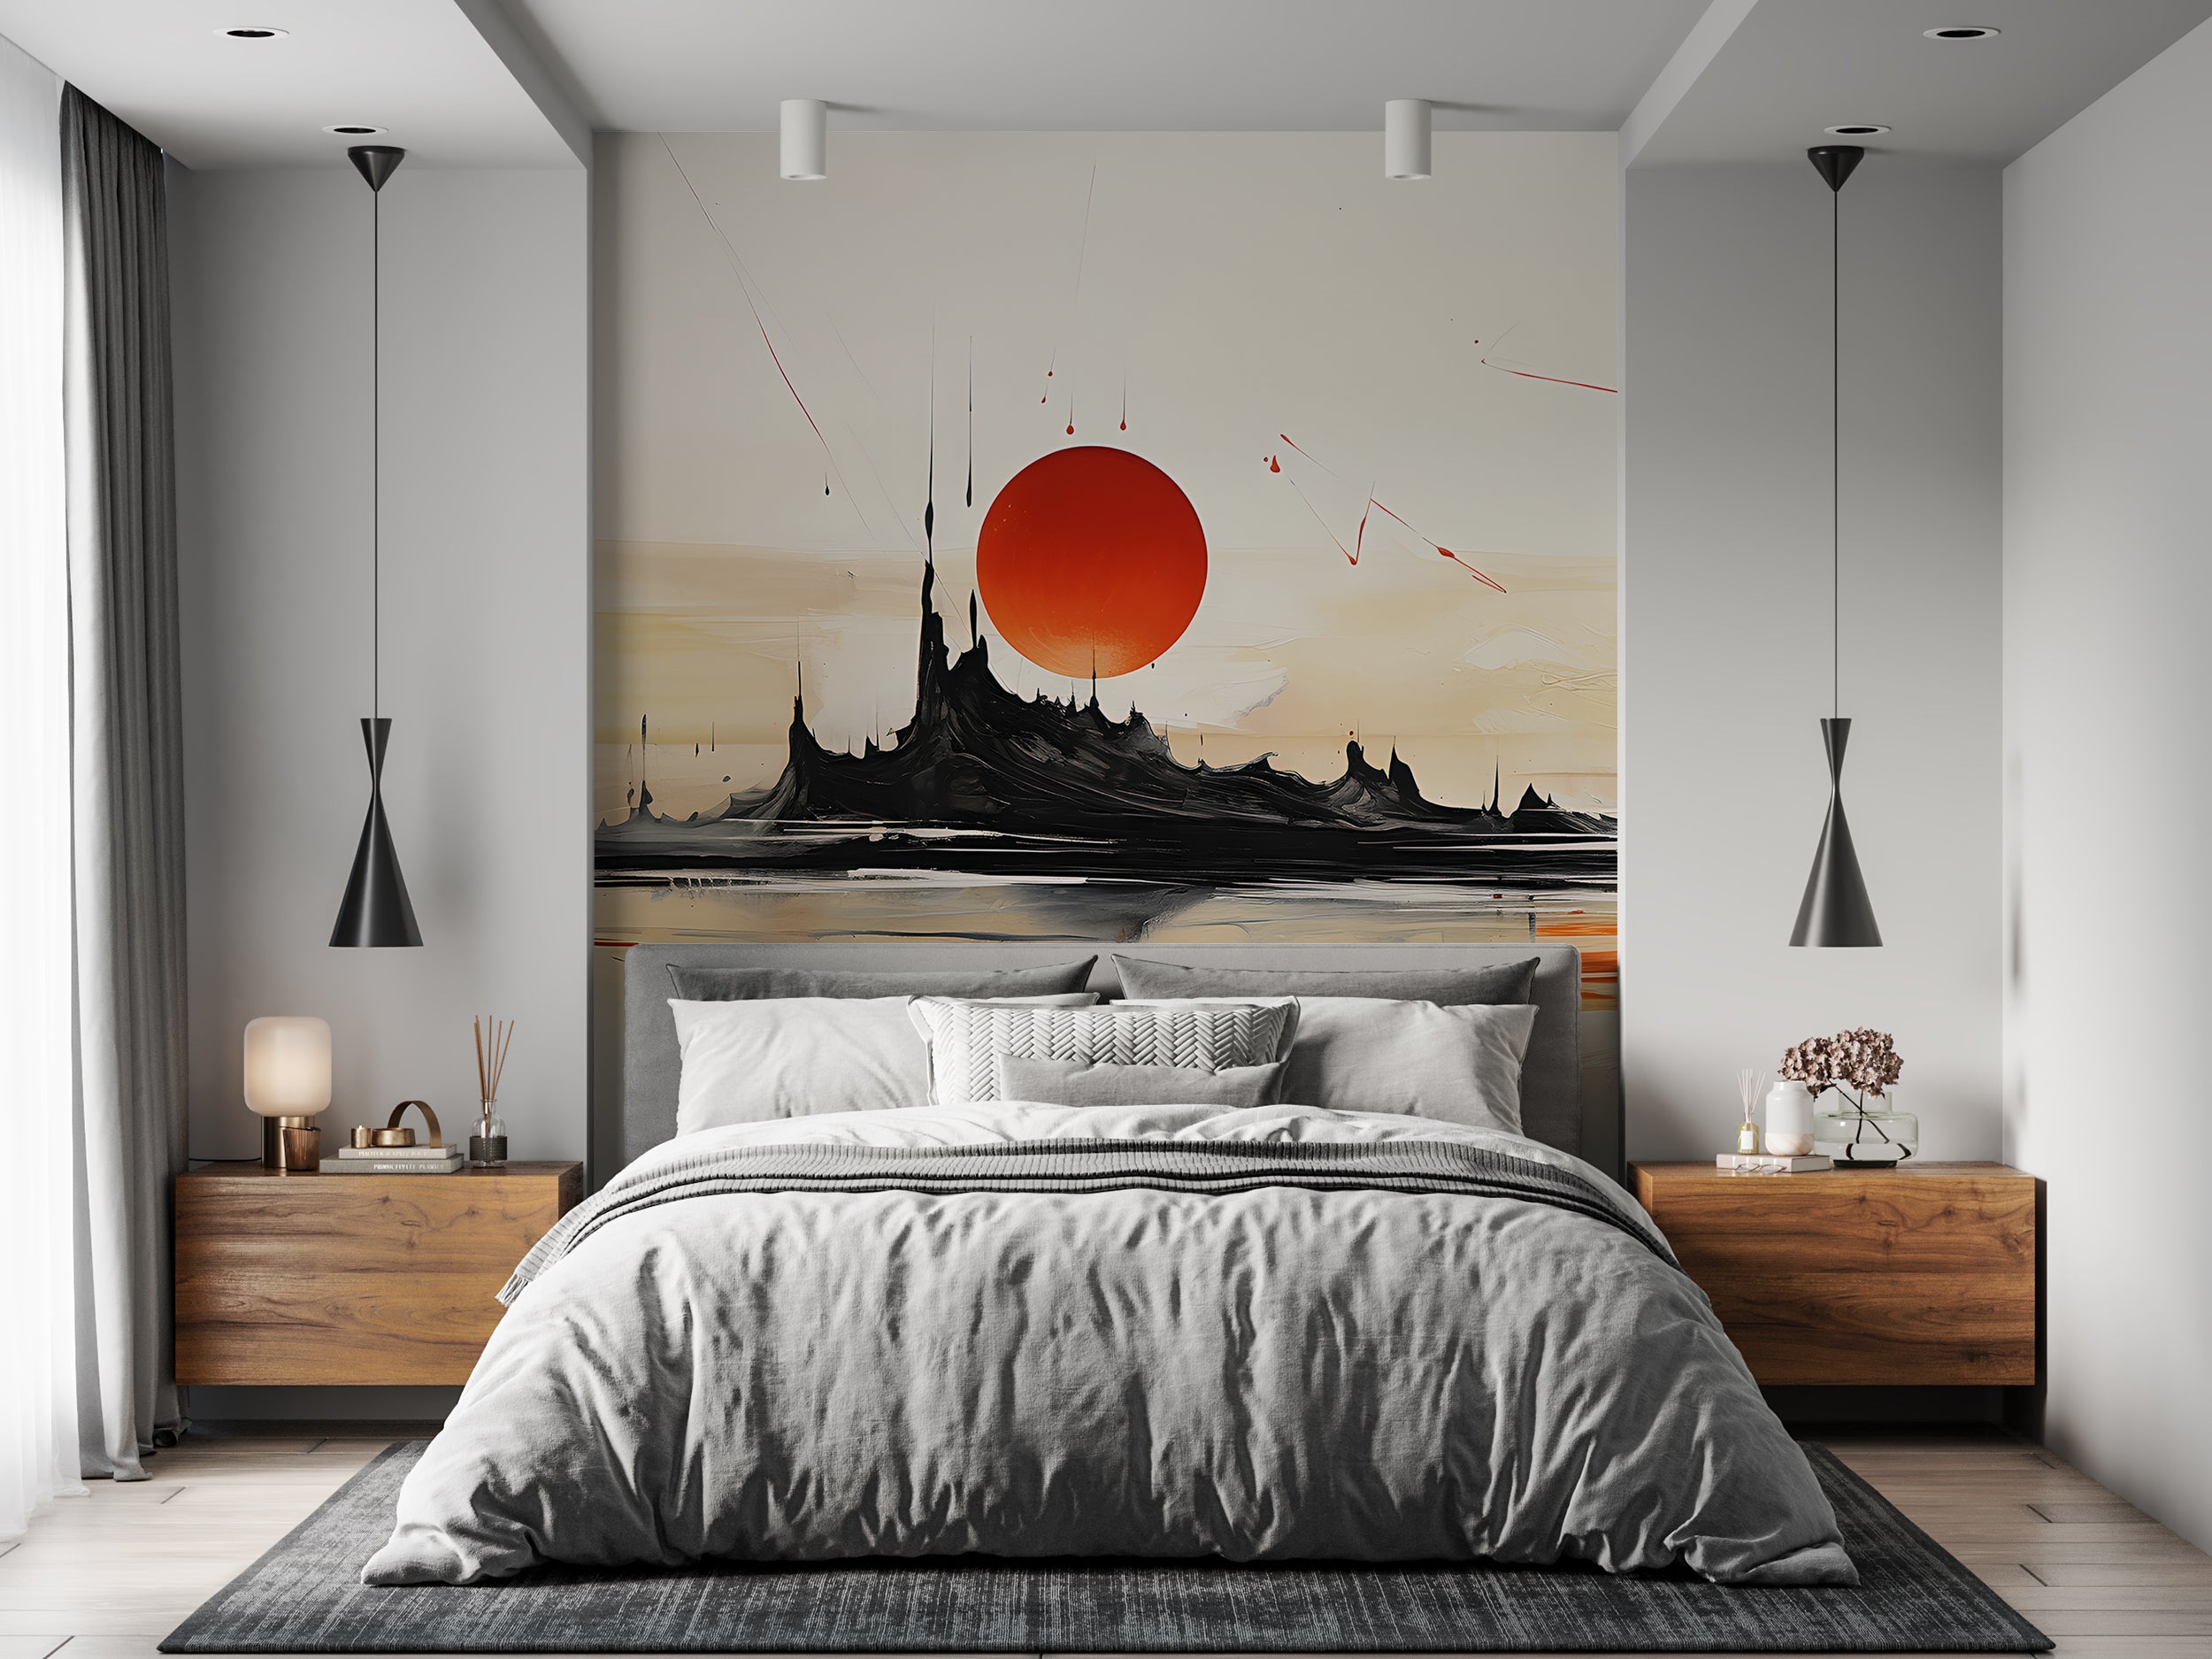 Japanese Nature Wall Decal